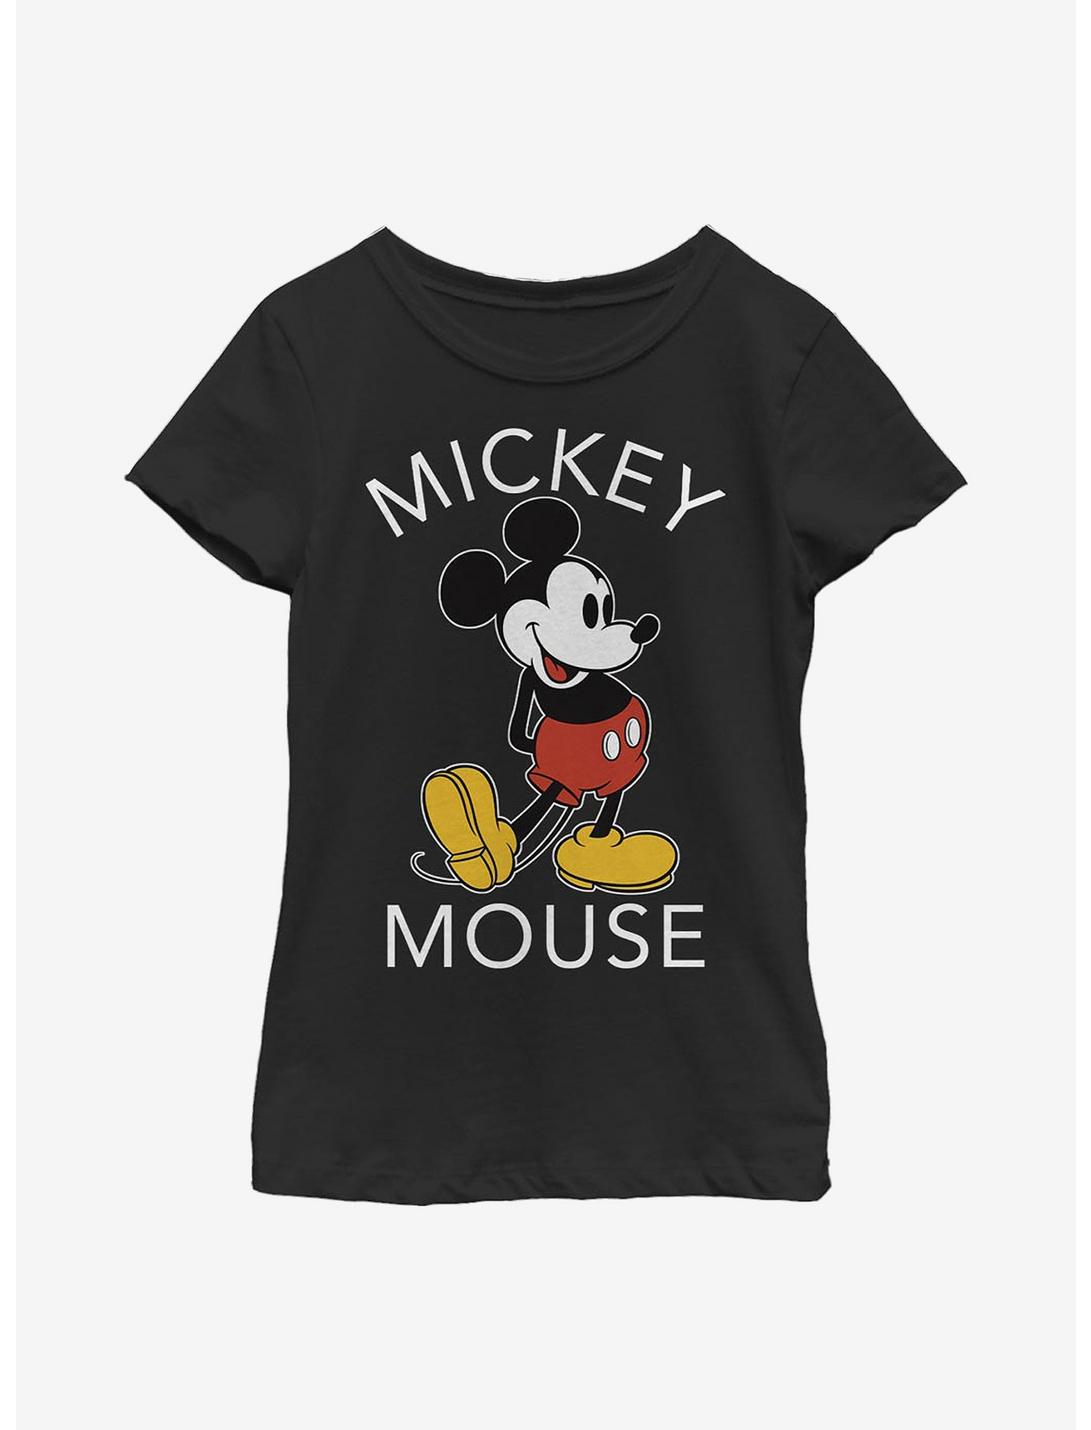 Disney Mickey Mouse Classic Youth Girls T-Shirt, BLACK, hi-res